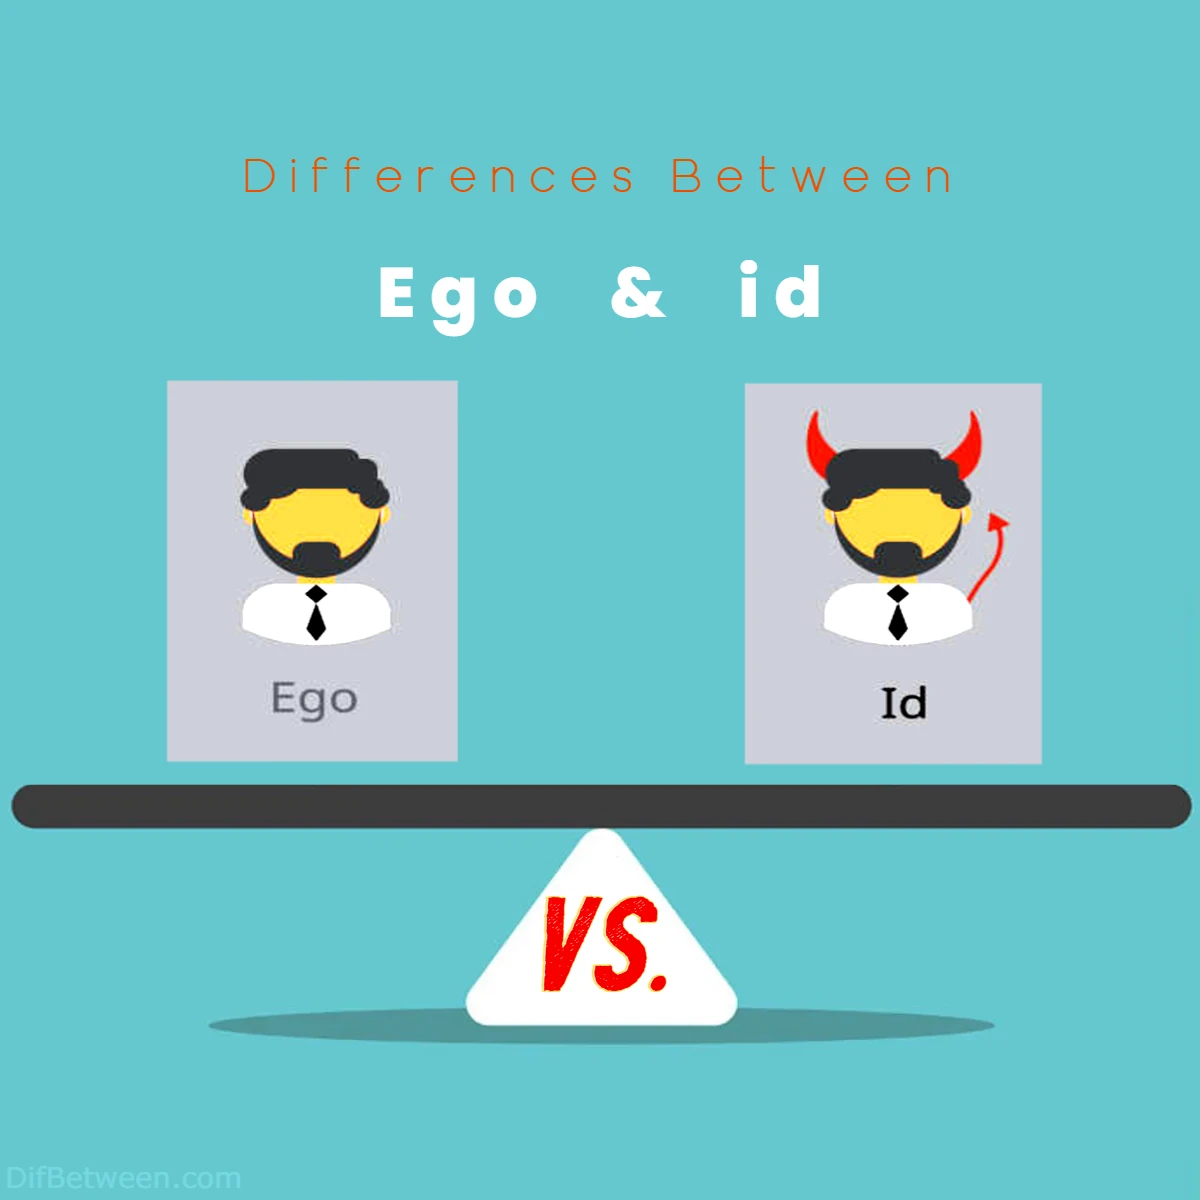 Differences Between Ego vs id